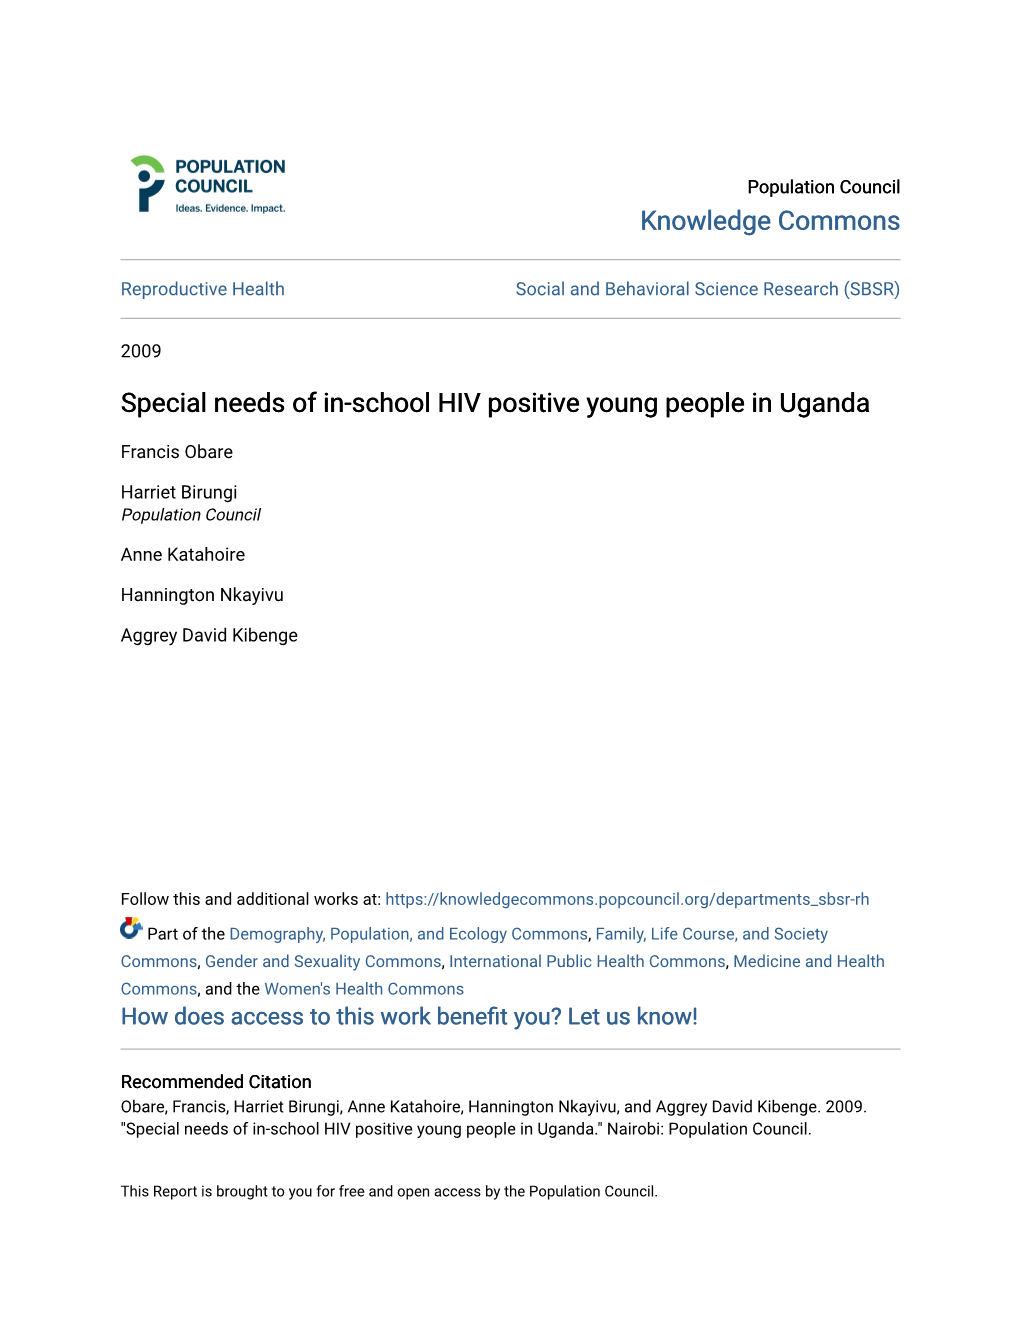 Special Needs of In-School HIV Positive Young People in Uganda